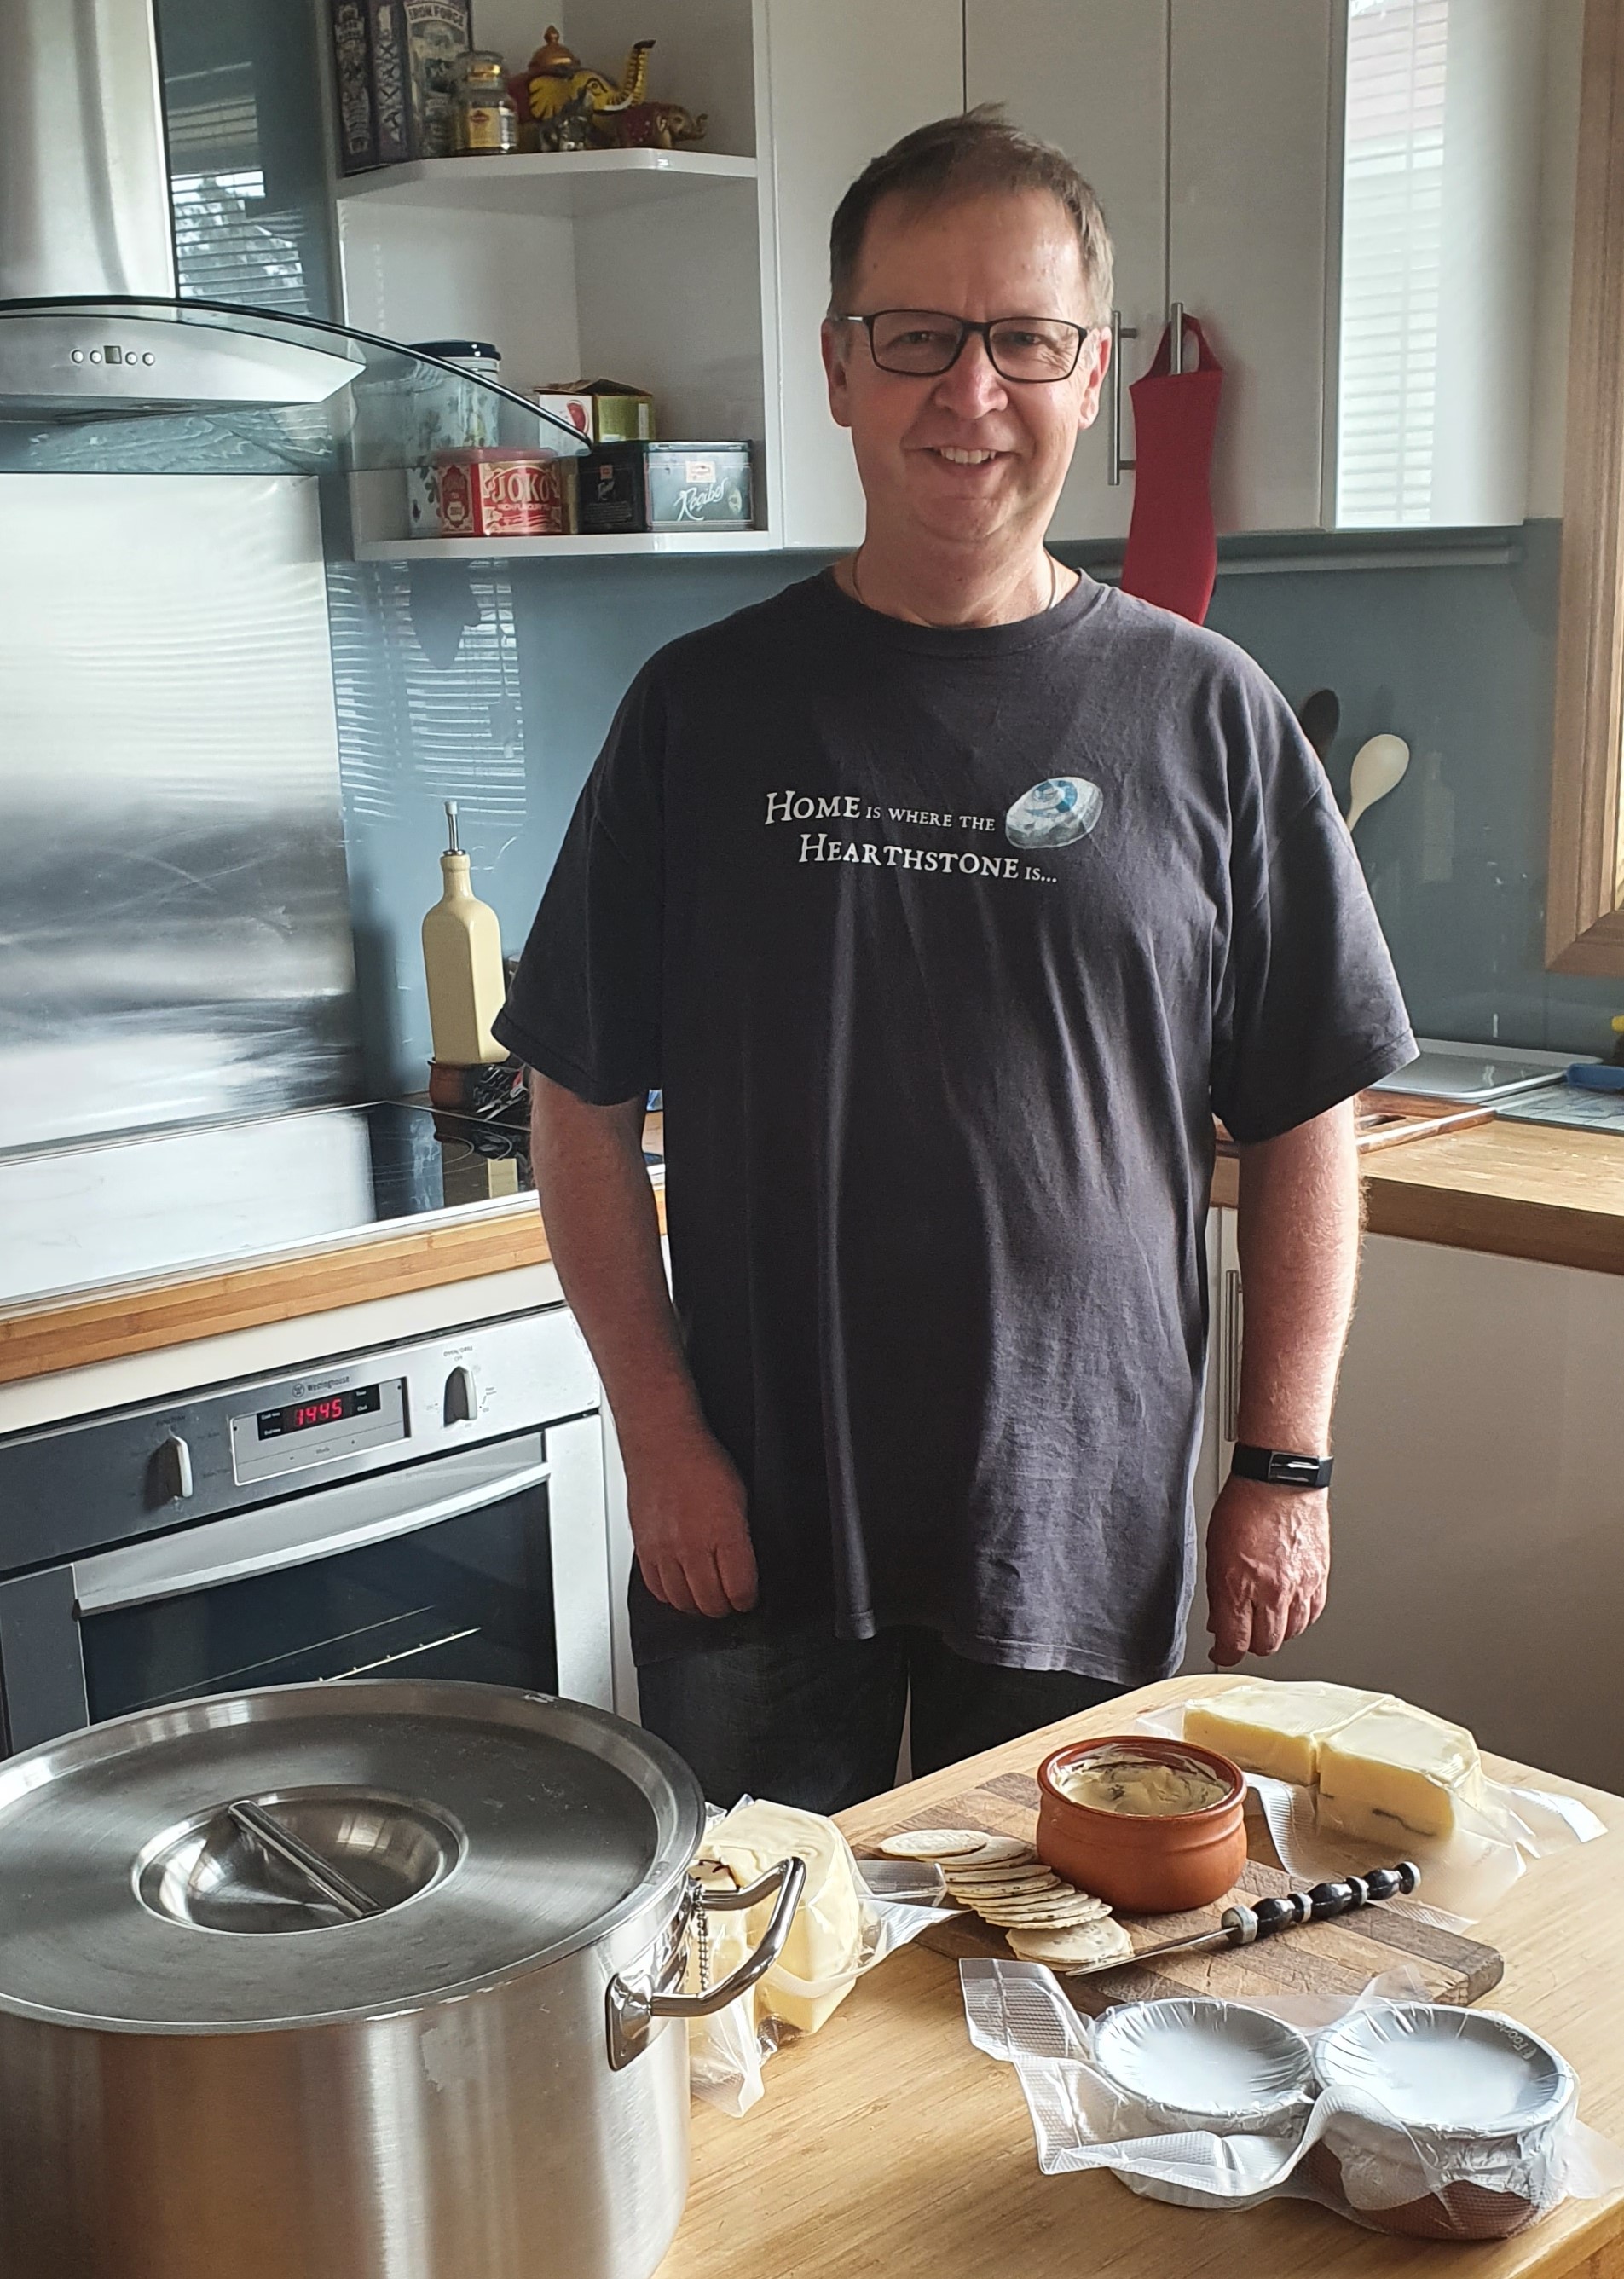 Man wearing glasses and a black t-shirt stands in his kitchen next to a bench with homemade cheeses.